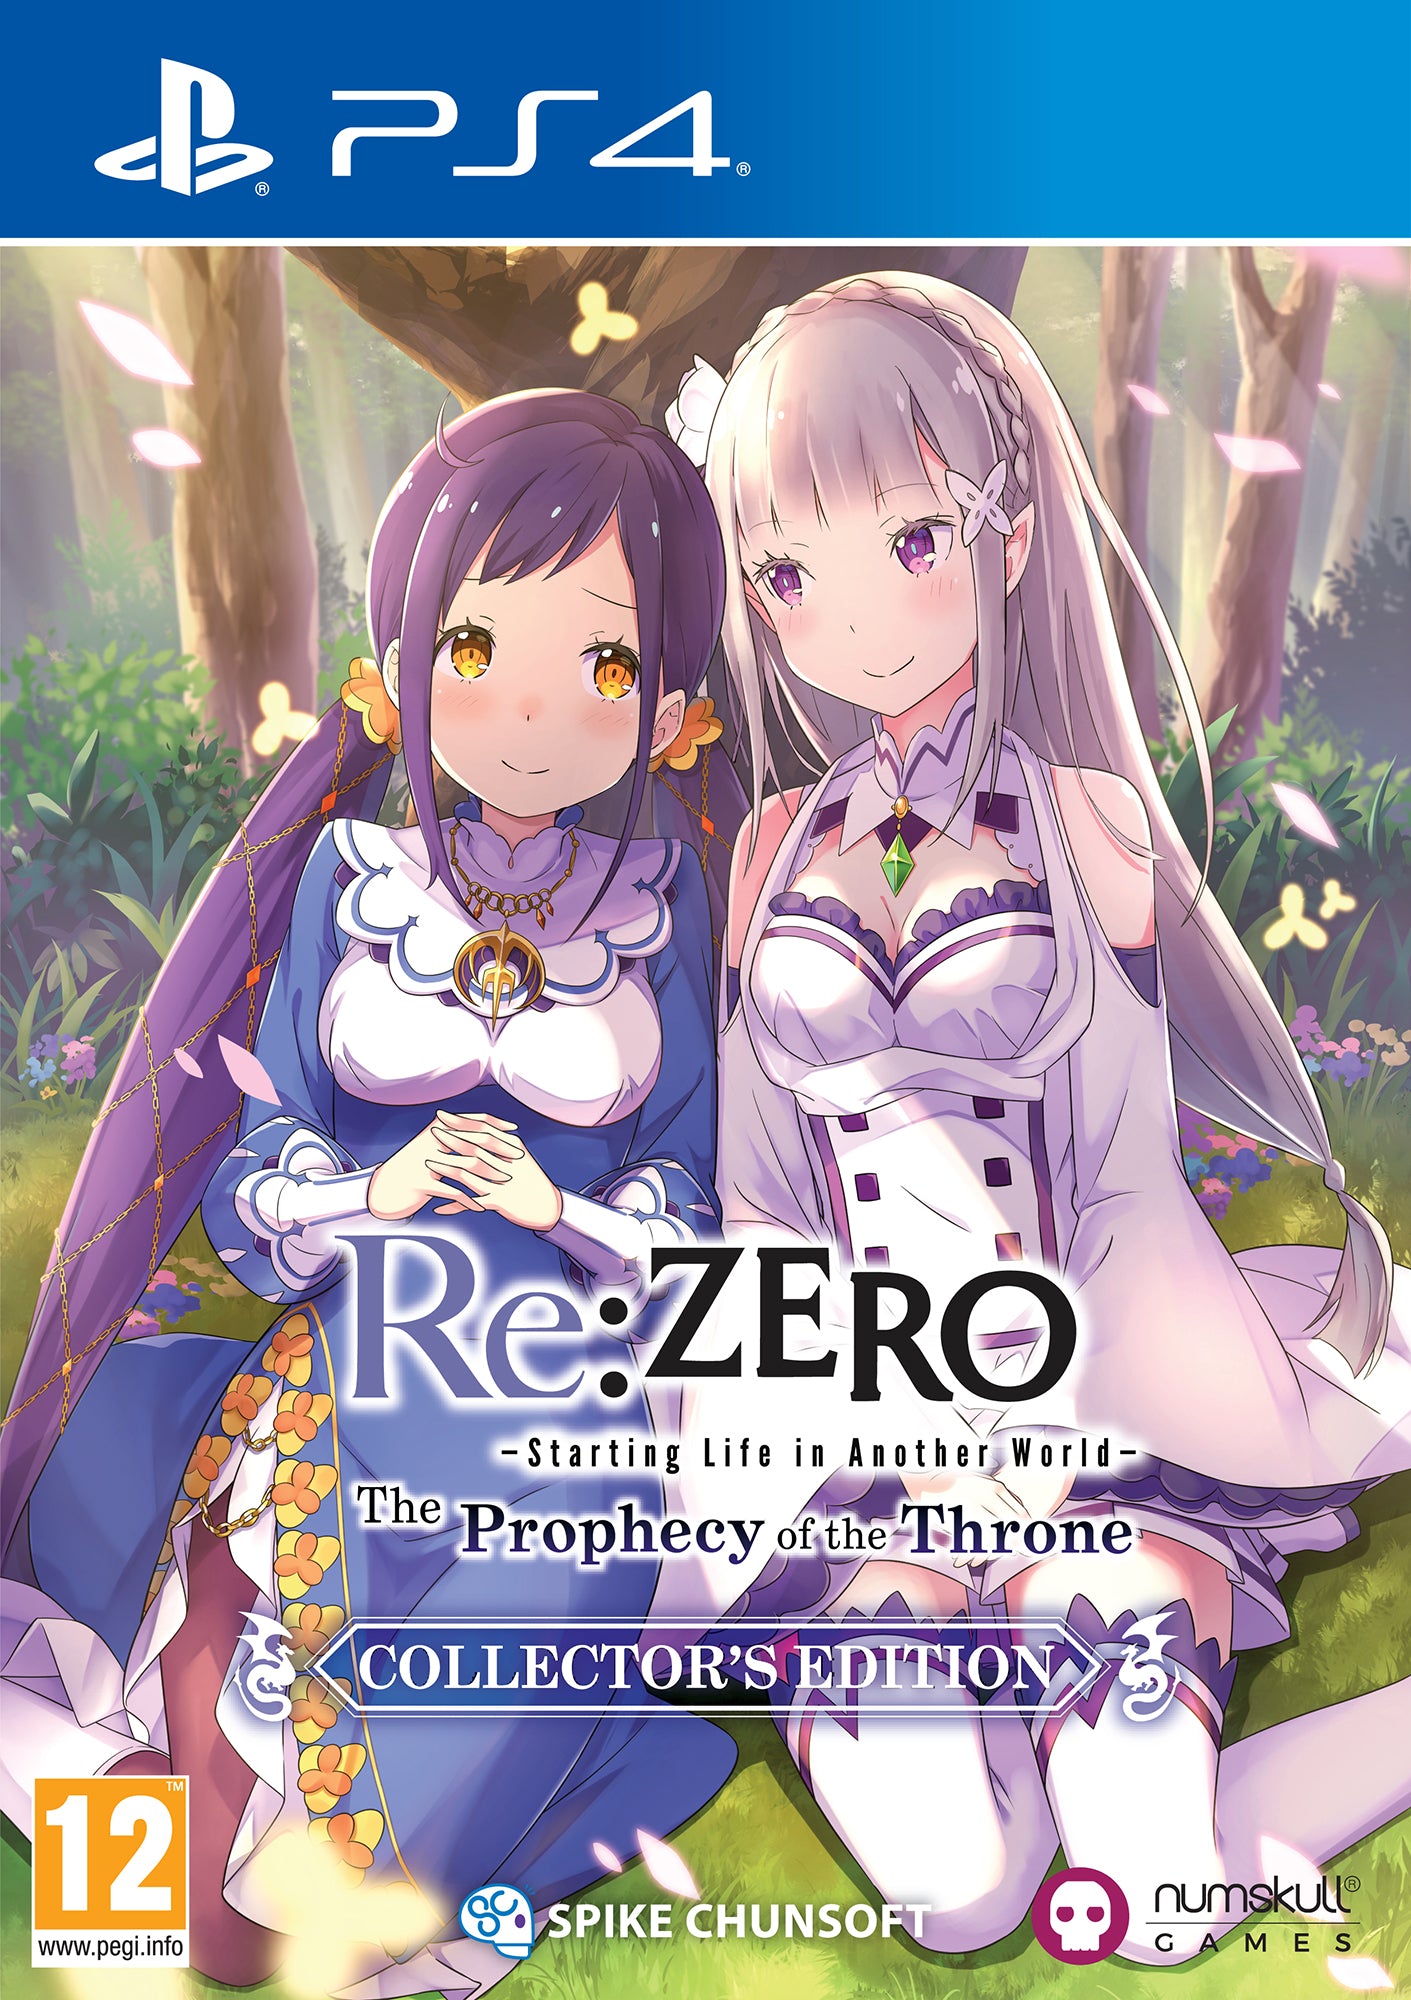 Re:ZERO - Starting Life in Another World: The Prophecy of the Throne Collector's Edition